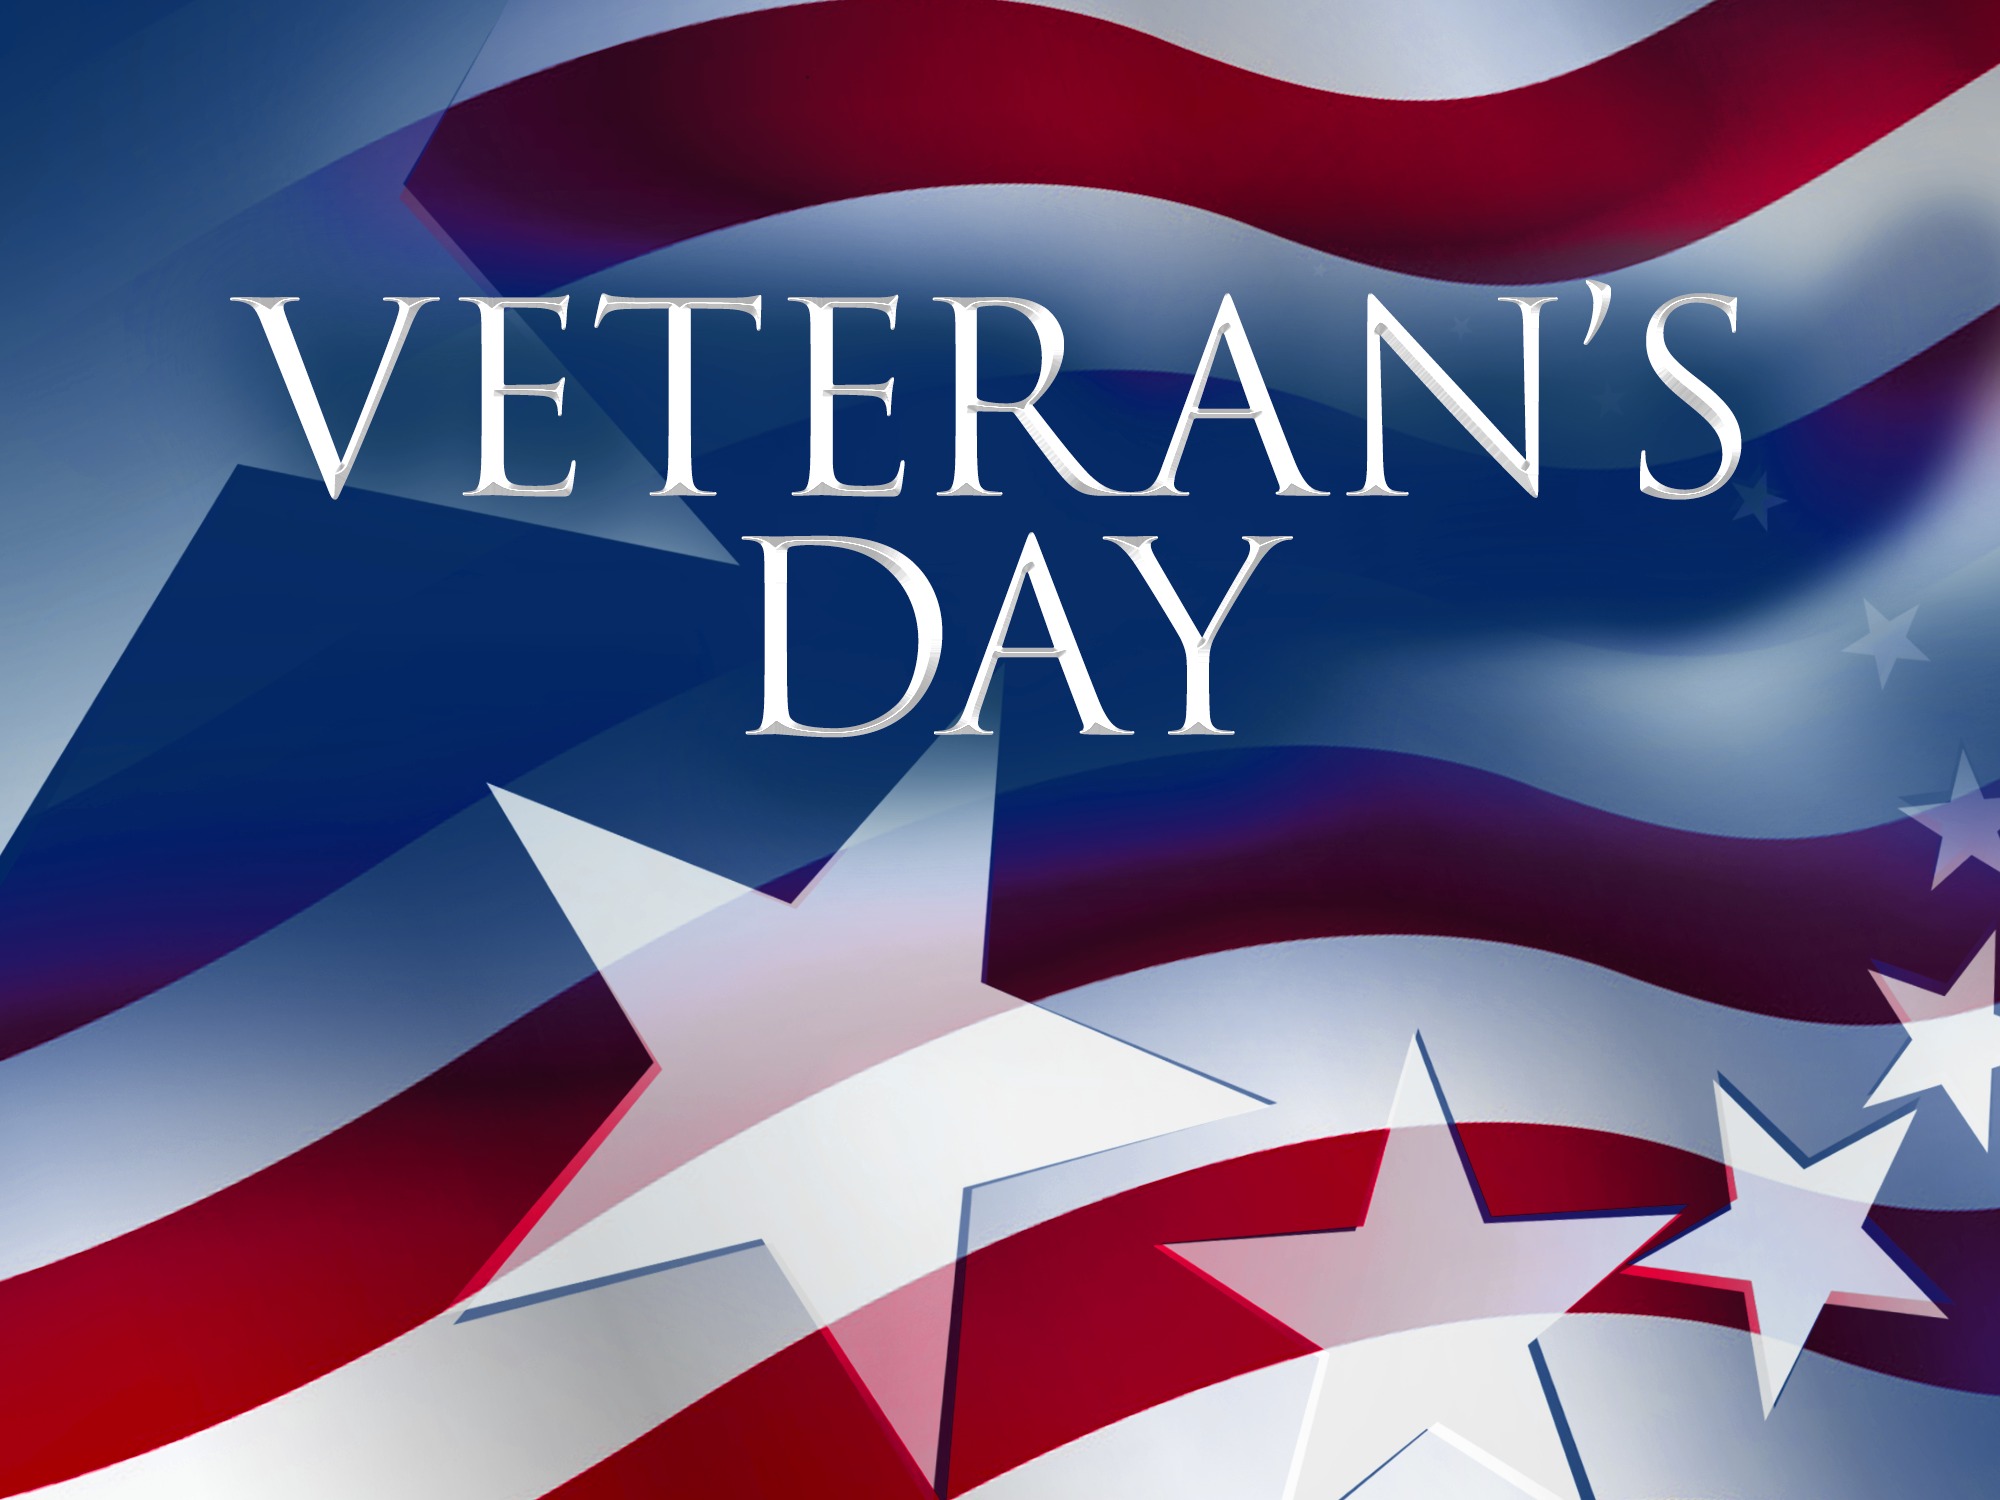 veterans day images free download